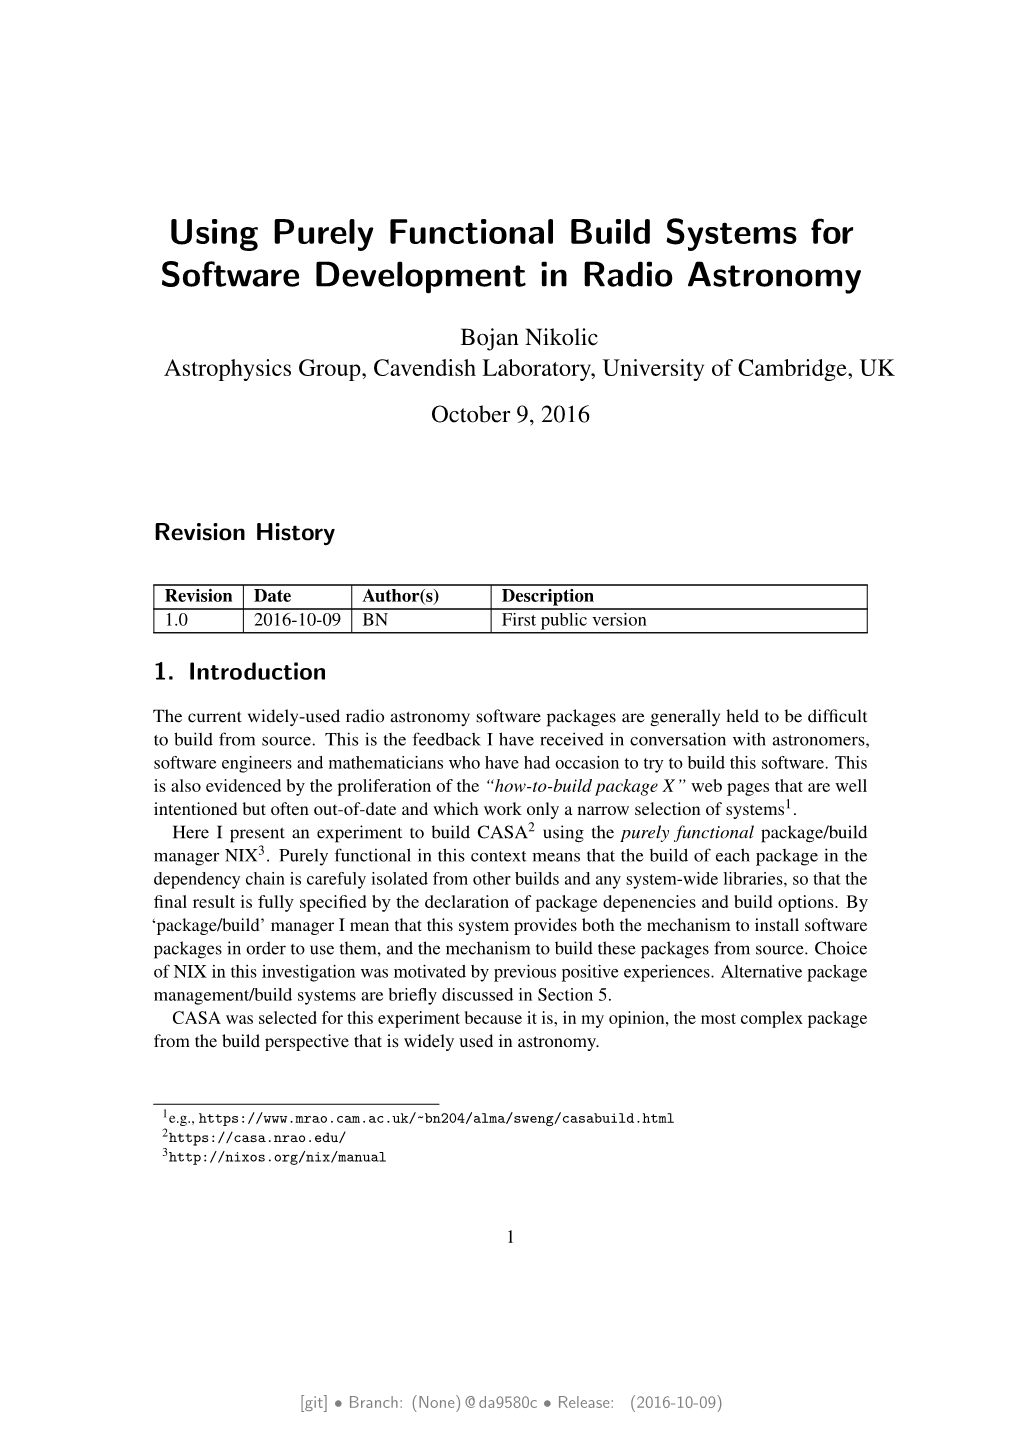 Using Purely Functional Build Systems for Software Development in Radio Astronomy